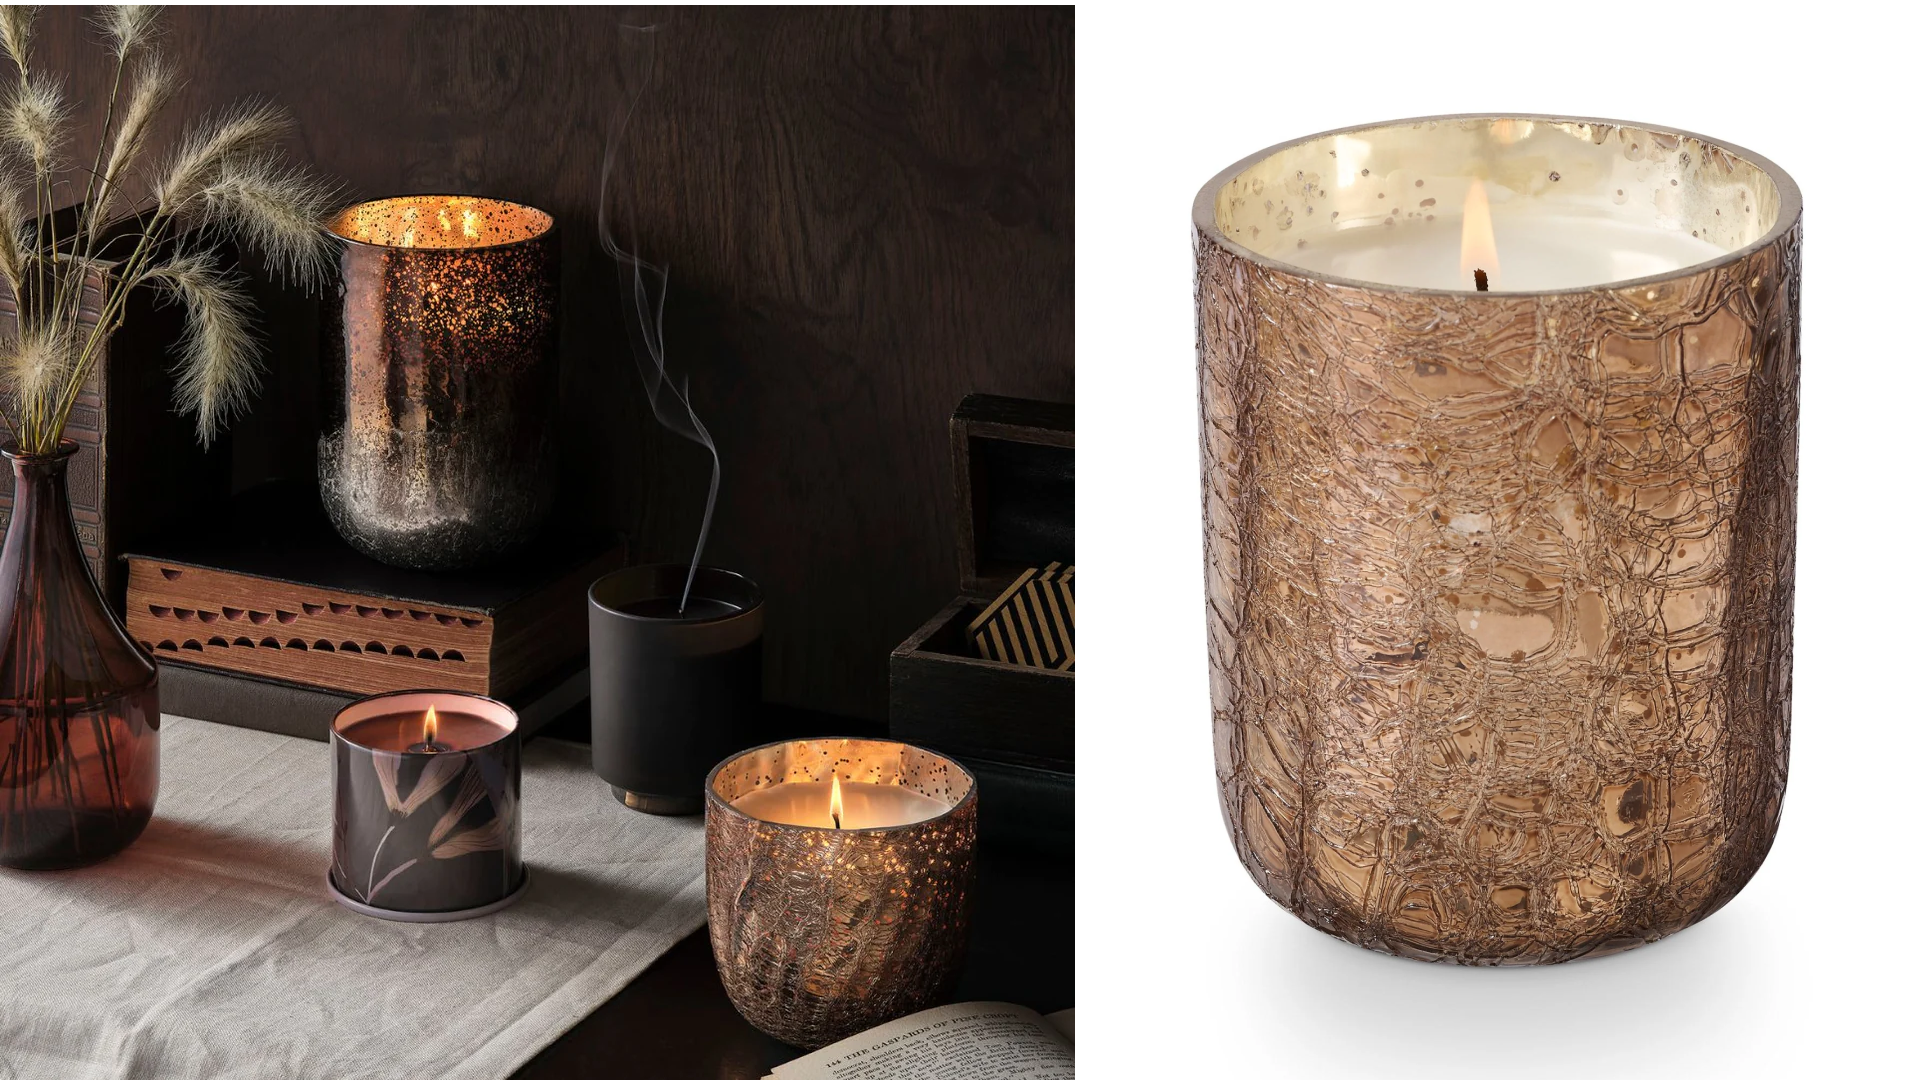 PSA: Here's a List of the Fall Candles You Should Be Burning